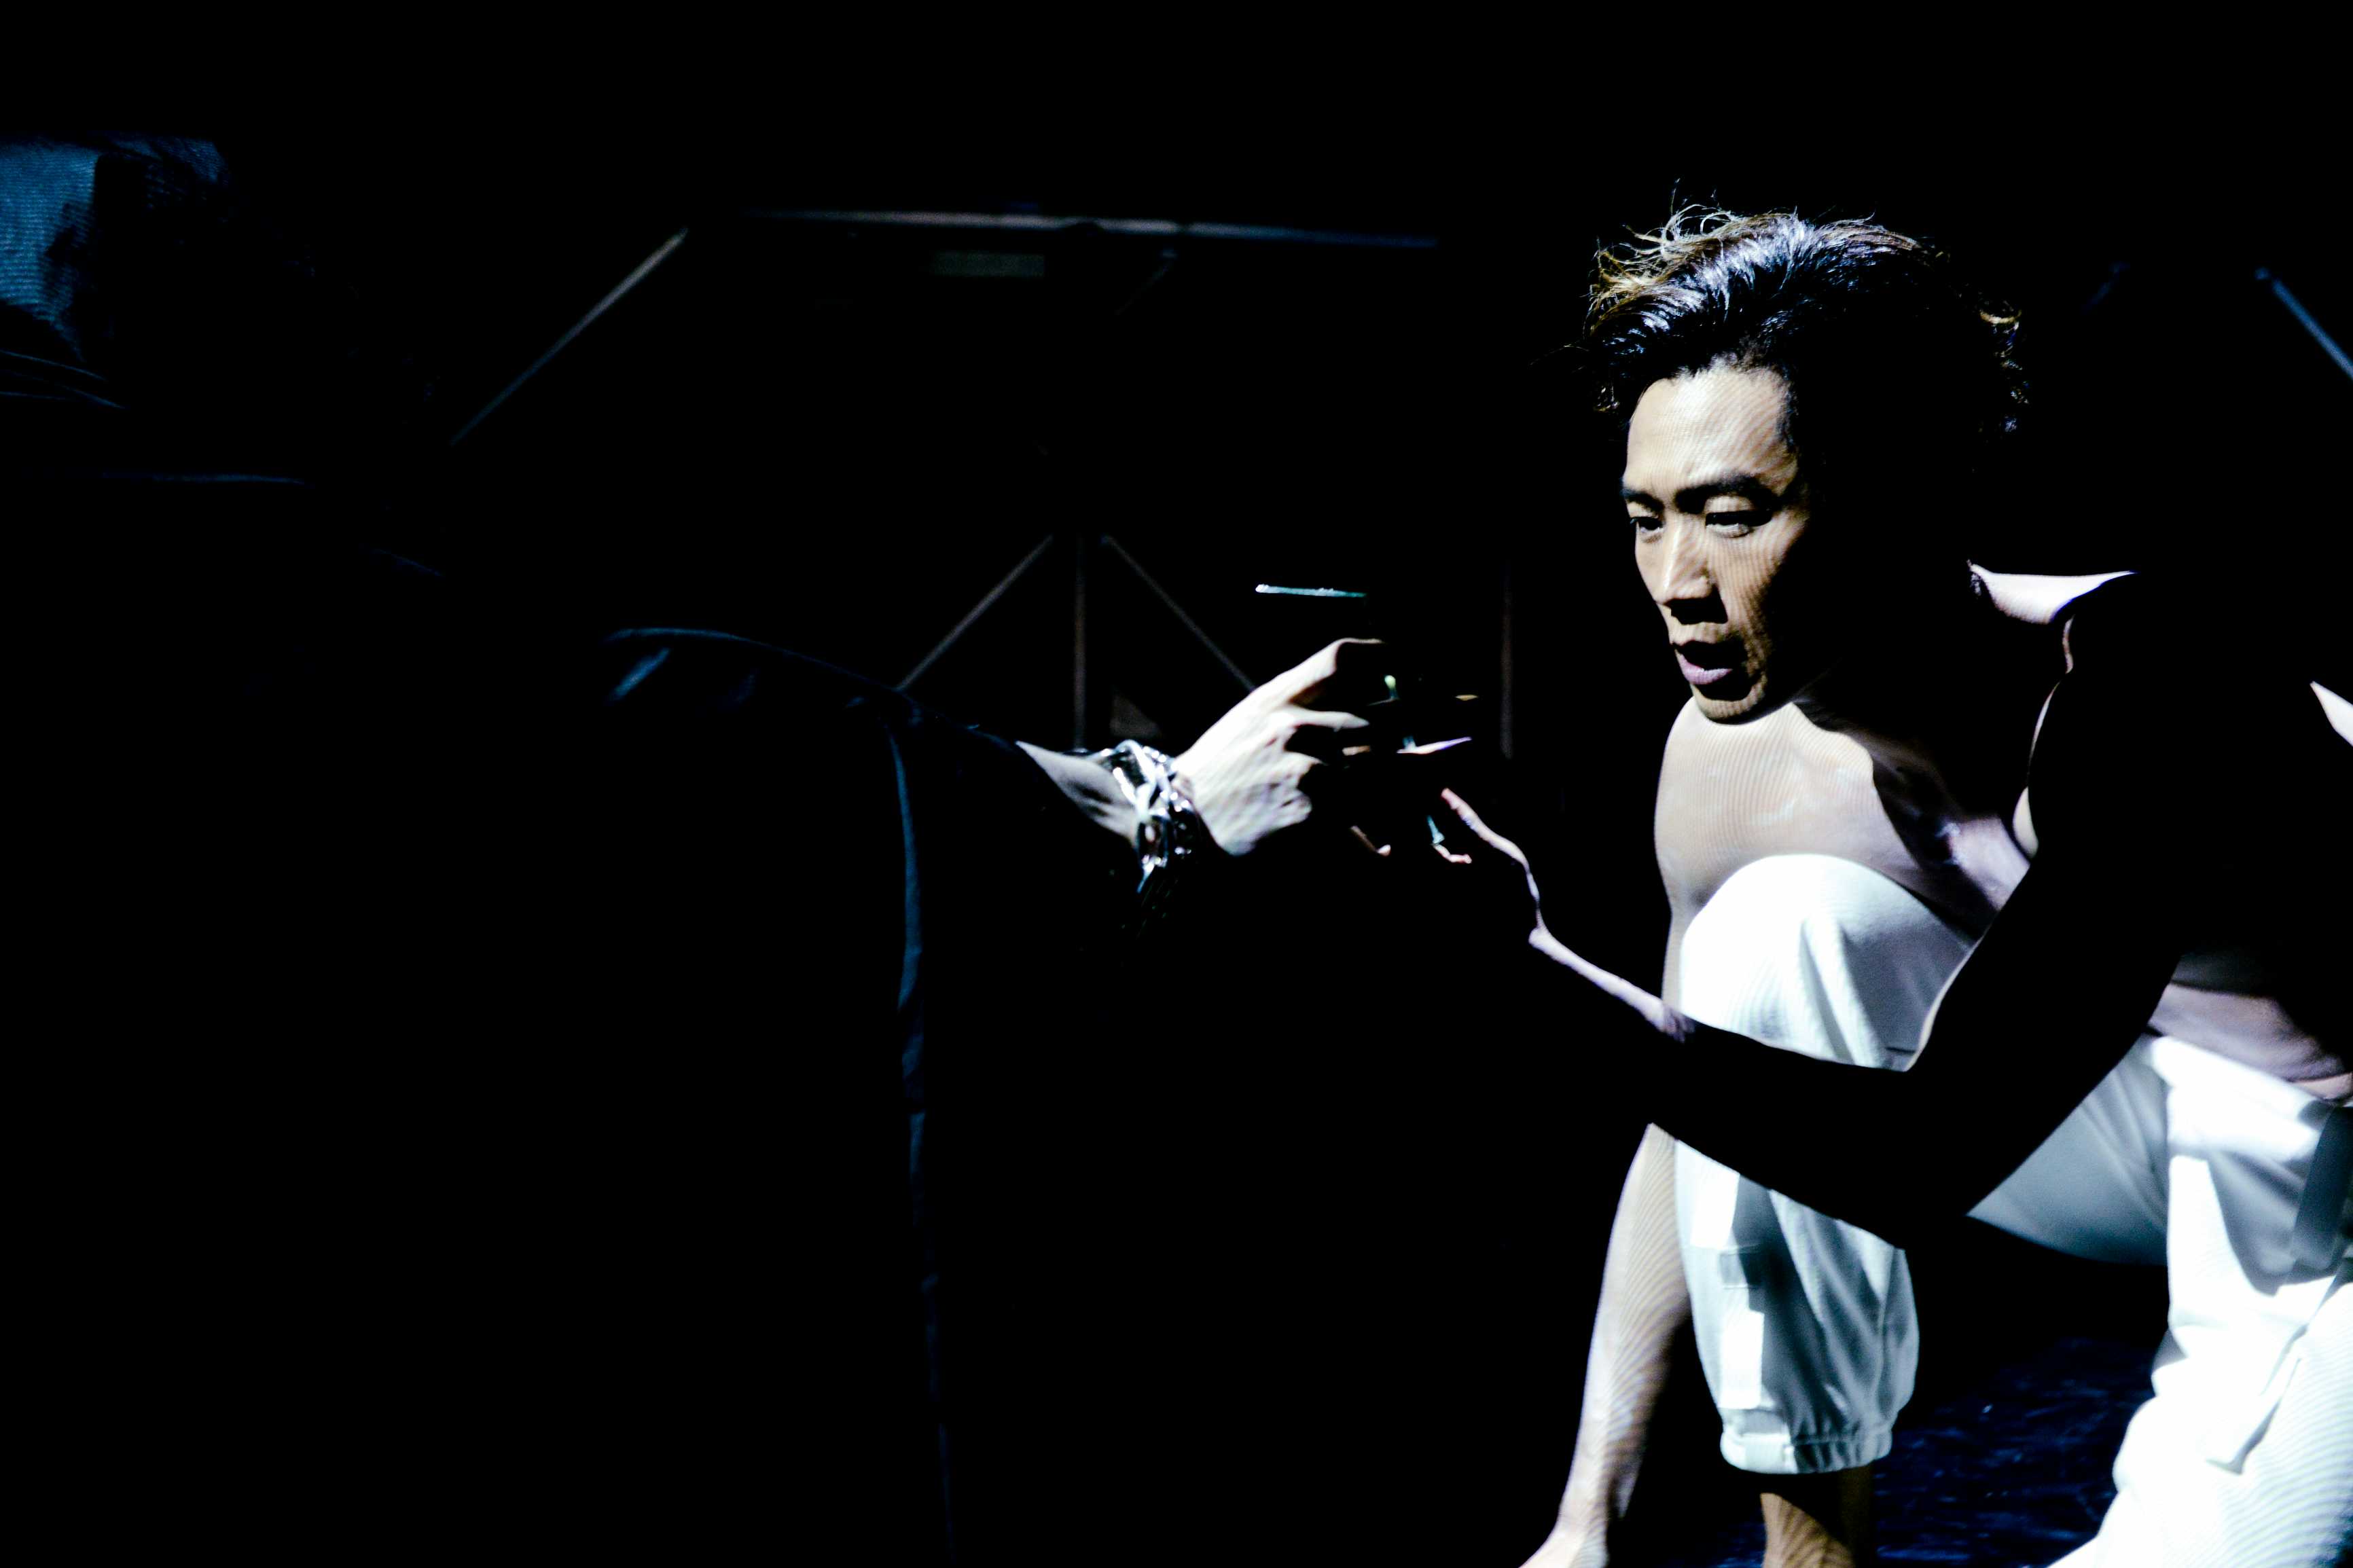 The Beautiful Ones | Featuring: Bon Tong | Tagged as: Show, The Beautiful Ones | Photo: Fung Wai Sun |  (Rooftop Productions • Hong Kong Theatre Company)  | Rooftop Productions • Hong Kong Theatre Company